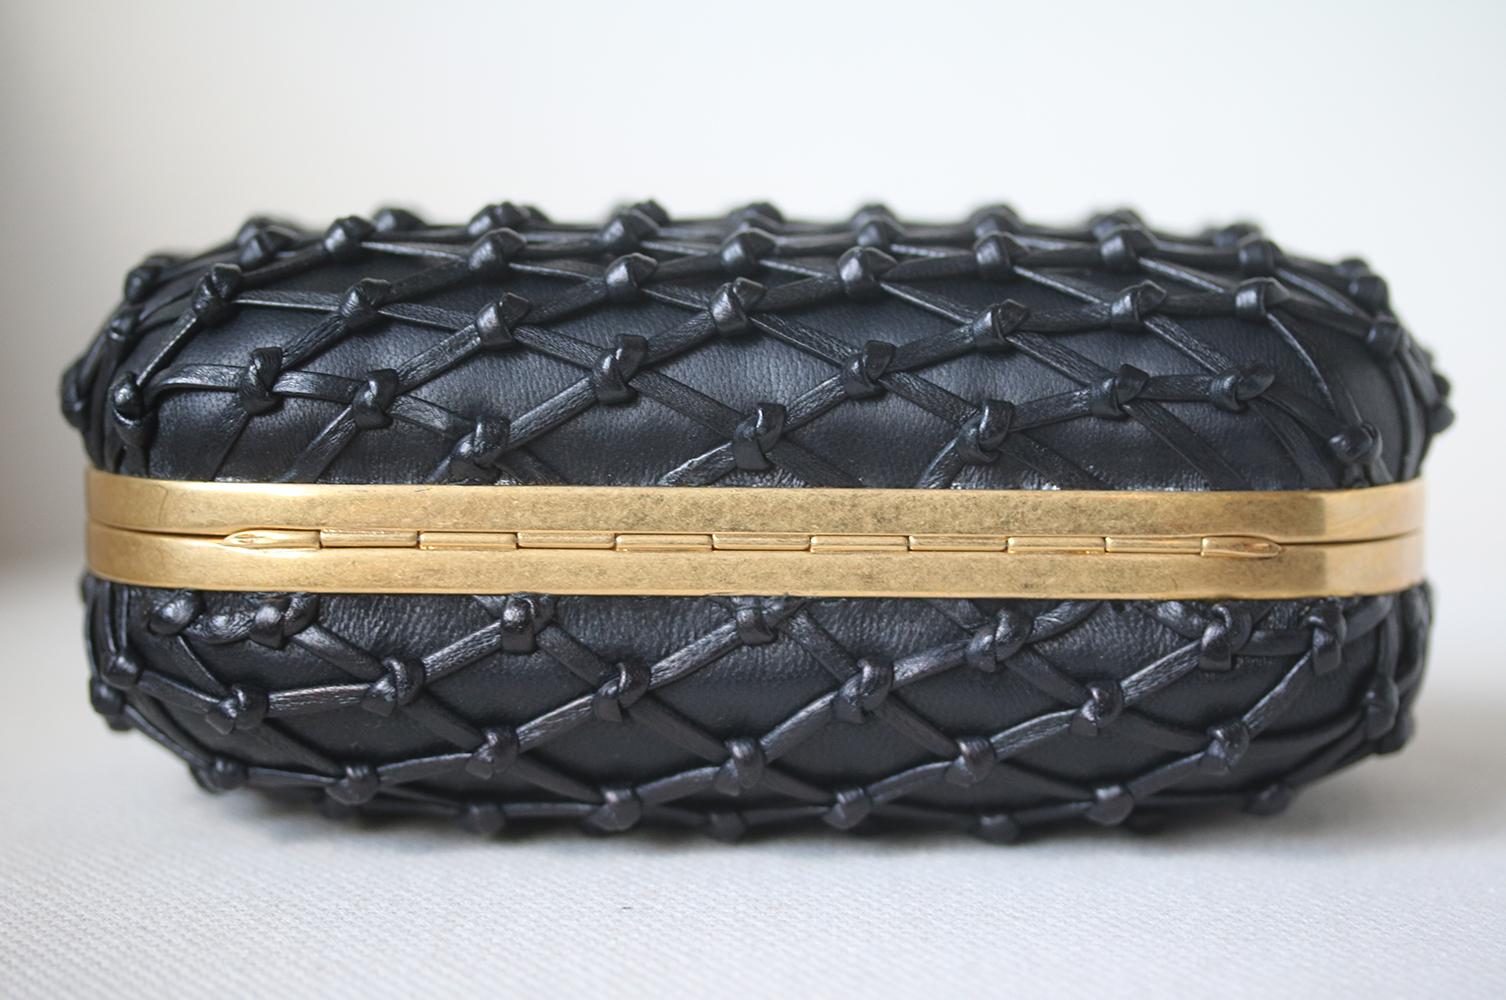 Gray Alexander McQueen Leather Knotted Lattice Box Clutch